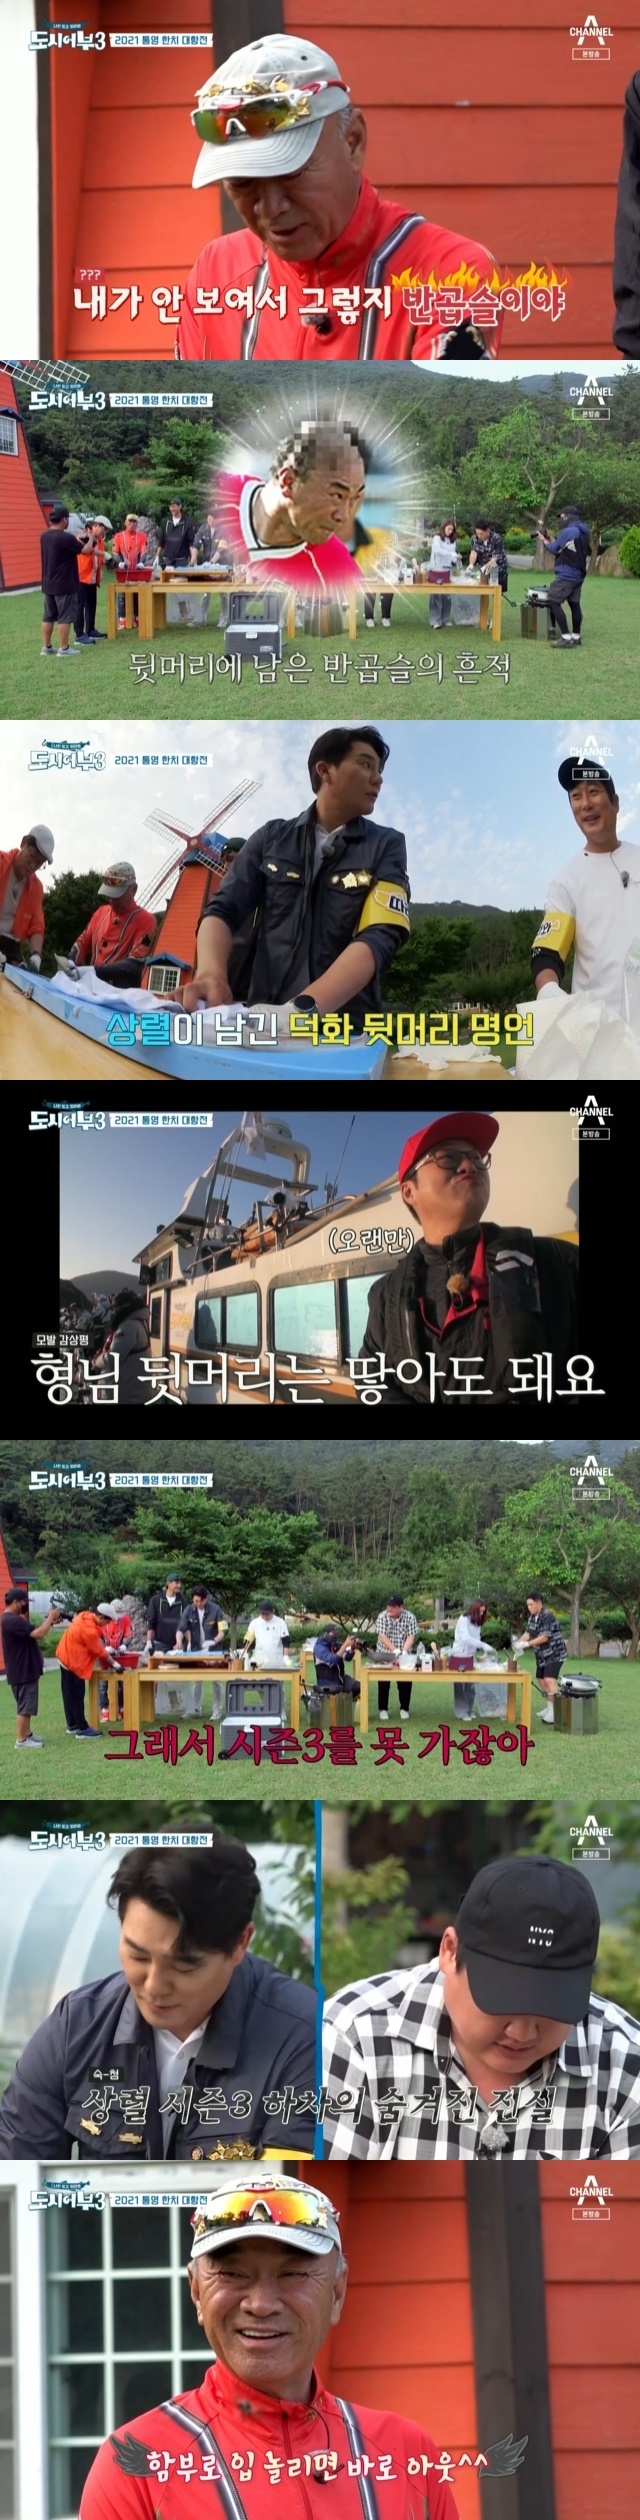 City fishermen joked about Ji Sang-ryeol getting off City Department Season 3.In the 13th episode of Channel As entertainment Follow Me Only, and City Fisherman Season 3 (hereinafter referred to as City Fisherman 3), which was broadcast on July 29, a fishing match between Tongyeong hanchi in Gyeongnam with Mo Tae-beom, Kim Yo-han and Bora was held.The city fishermen who fished at night on the night succeeded in catching more than 464 hanchi and had a happy fishing class.The day was bright and they tried to eat with their own hanchi sashimi and sushi, when Lee Tae-gons hair, which was cool from the morning, became a hot topic.Lee Tae-gon said, I am originally half-knuckle. However, Kim Yo-han laughed after continuing his suspicion that he dryed nicely.Meanwhile, Lee Deok-hwa said, I do not see it, so it is half a ball.Lee Tae-gon said, Its on the back of the head. Lee Deok-hwa mentioned the back of Lee Deok-hwa, who is a little alive, and Lee Deok-hwa laughed humorously, saying, There are not a few left.